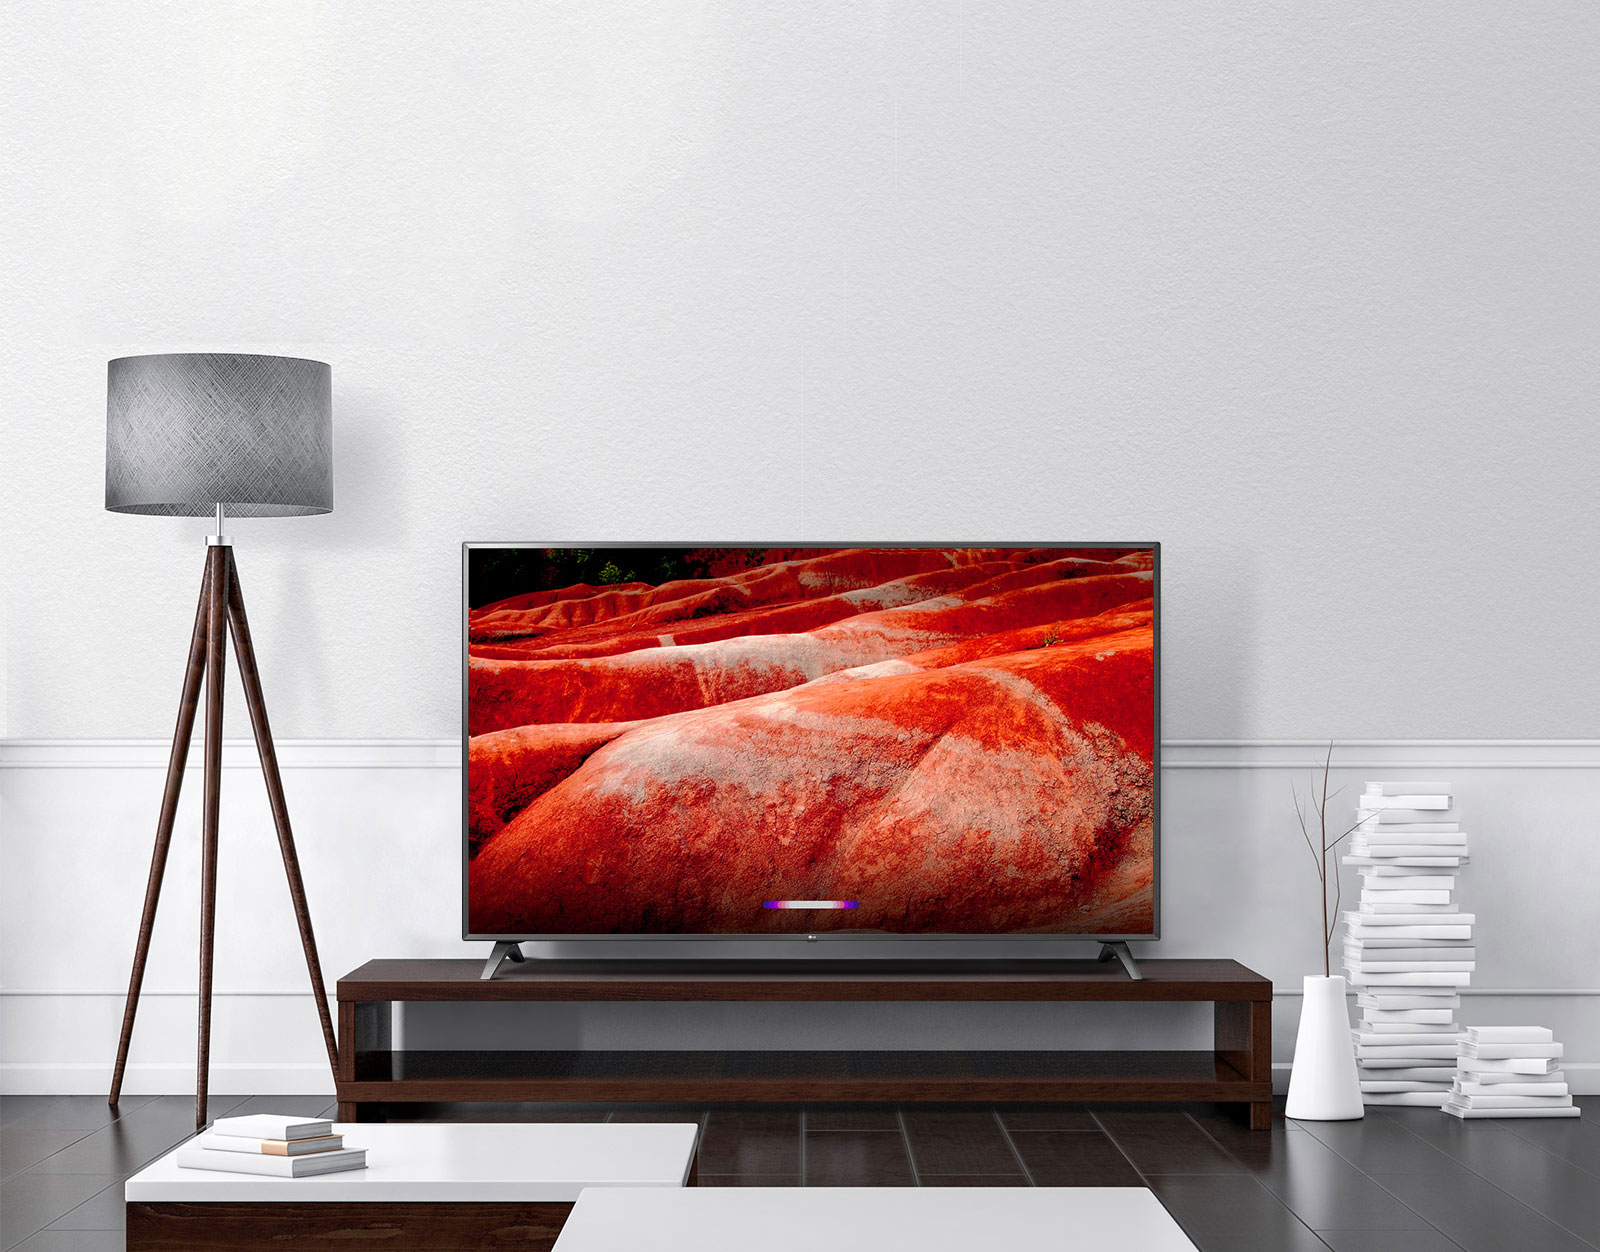 See the bigger picture with TVs over 80 inches1